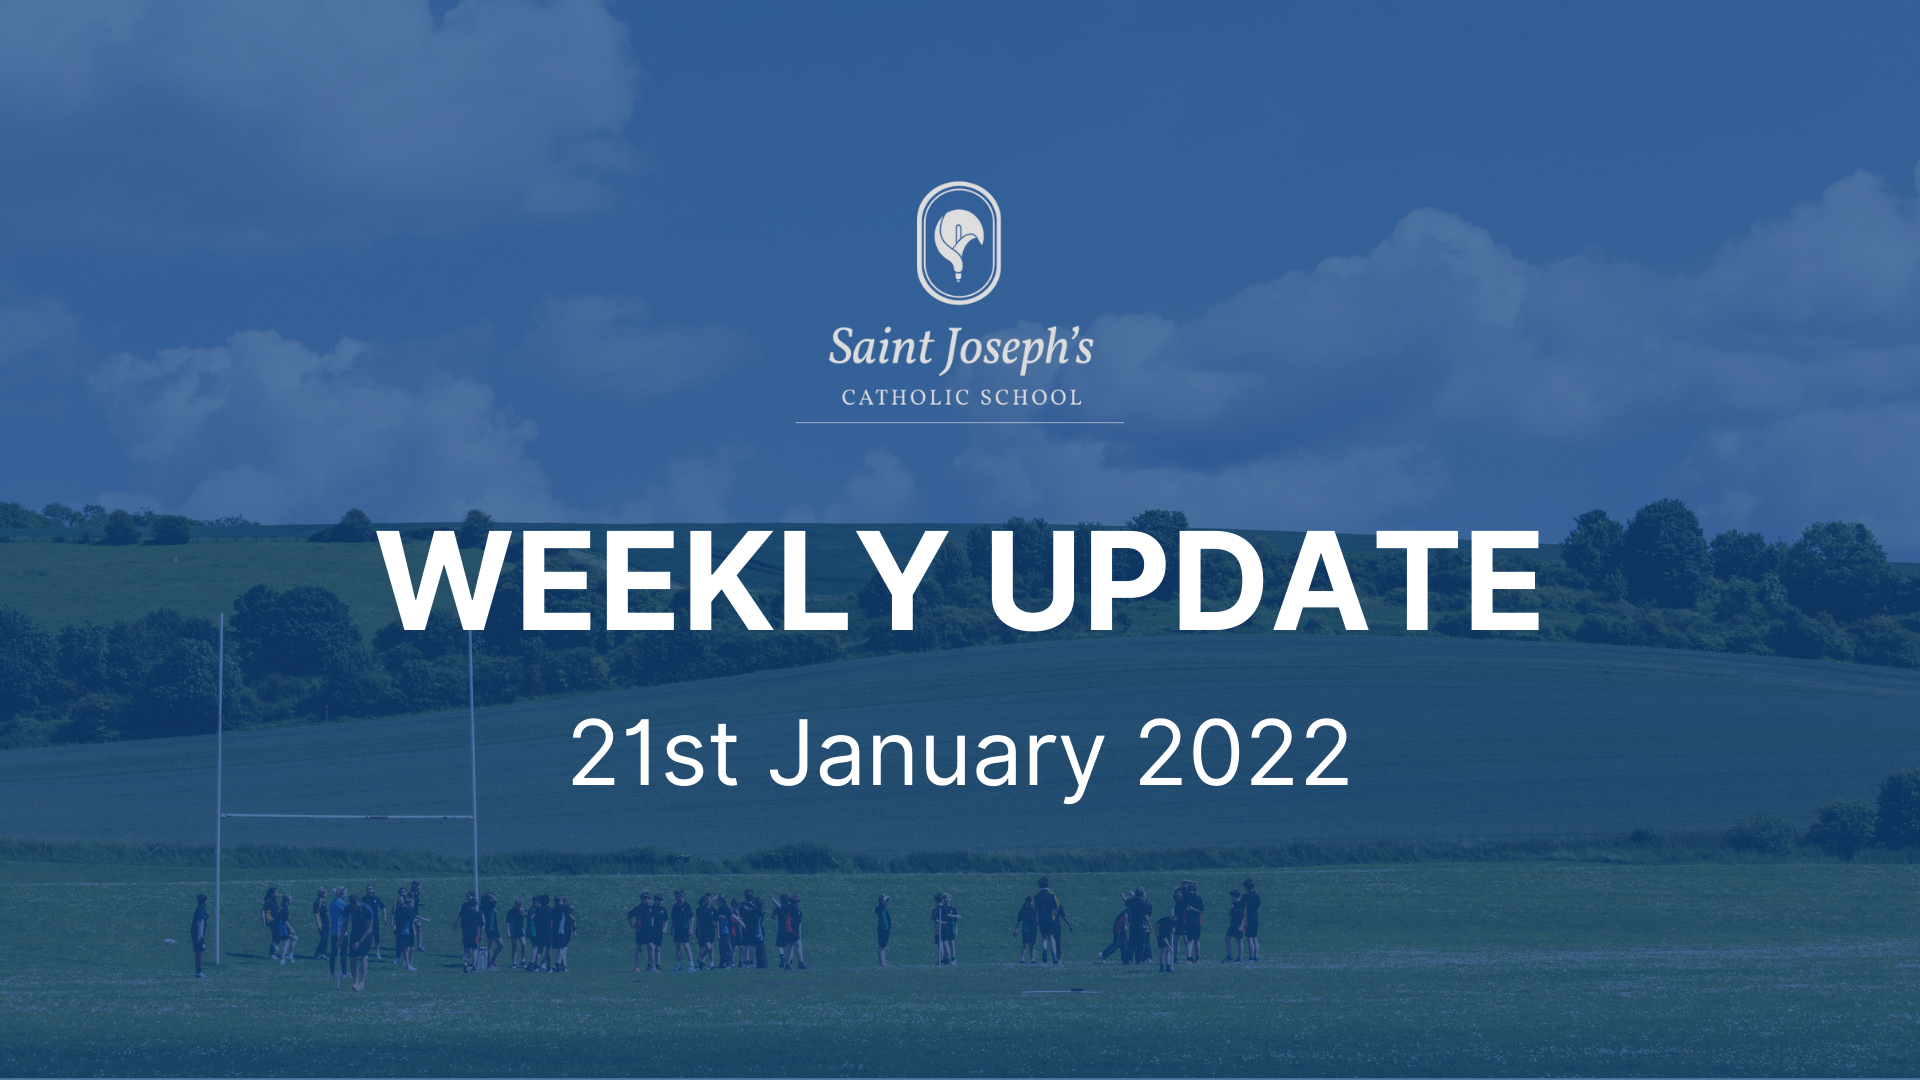 Featured image for “Weekly Update: 21st January 2022”